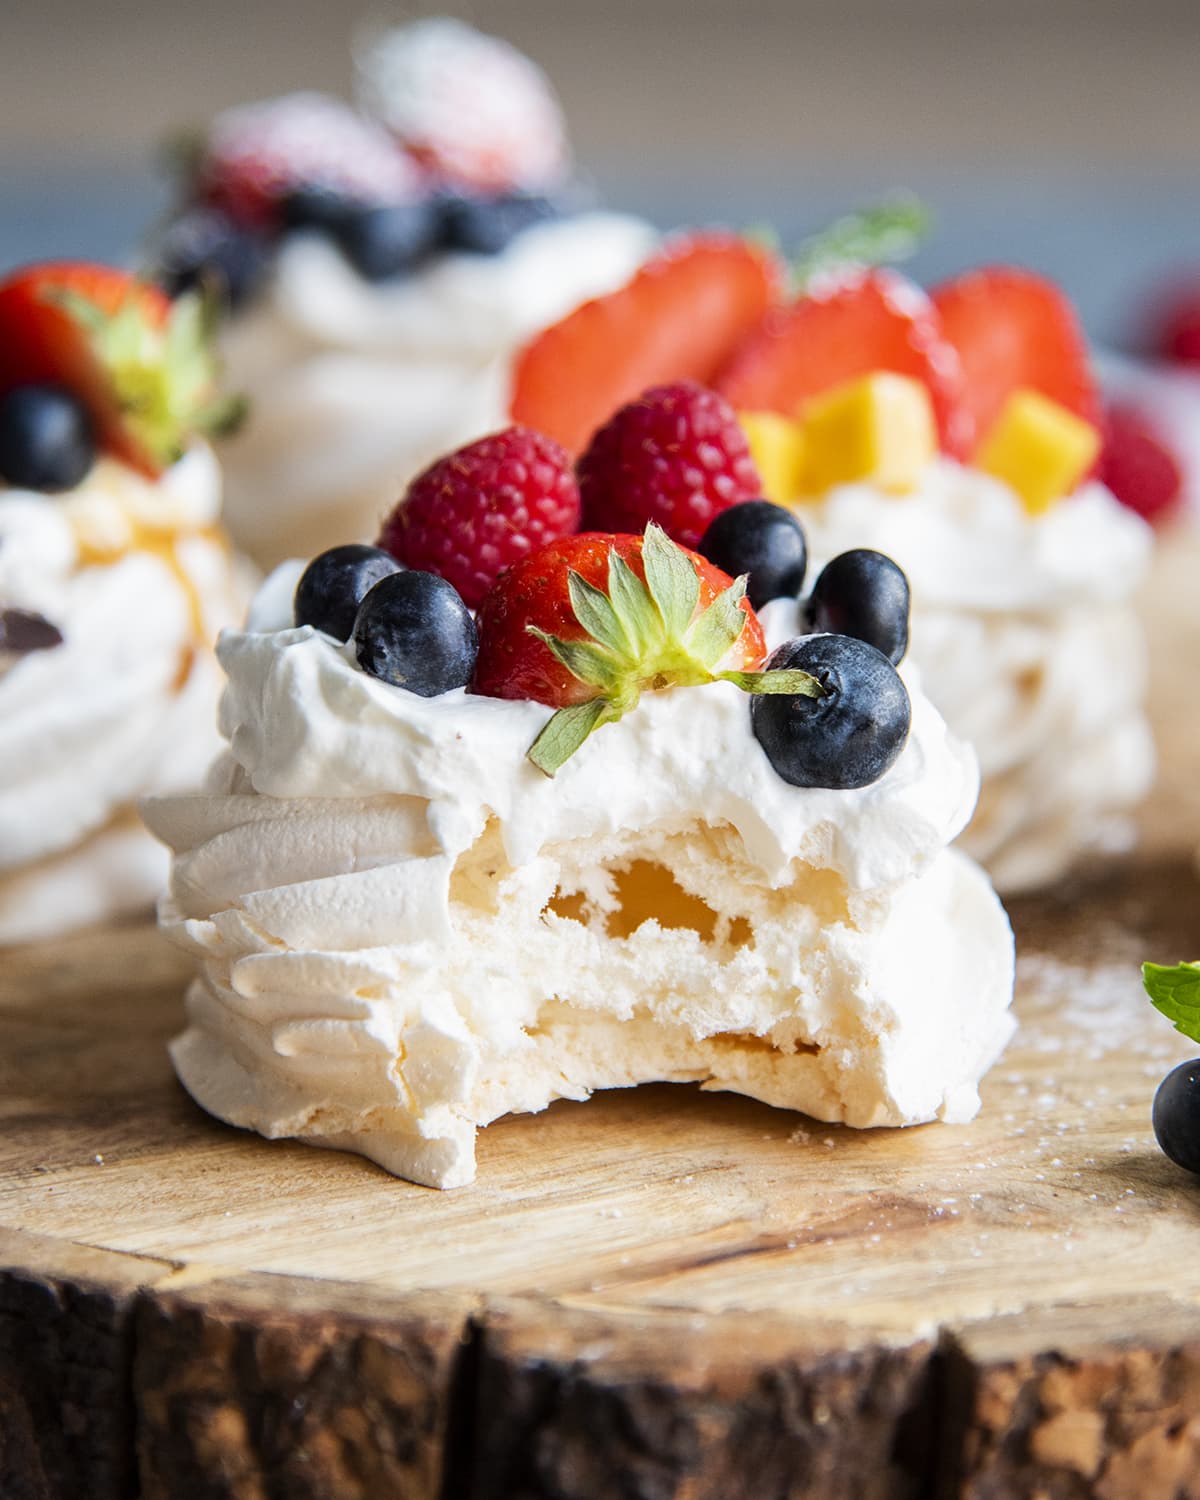 A mini pavlova with a bite out of it showing the marshmallowey middle. It is topped with fresh berries.